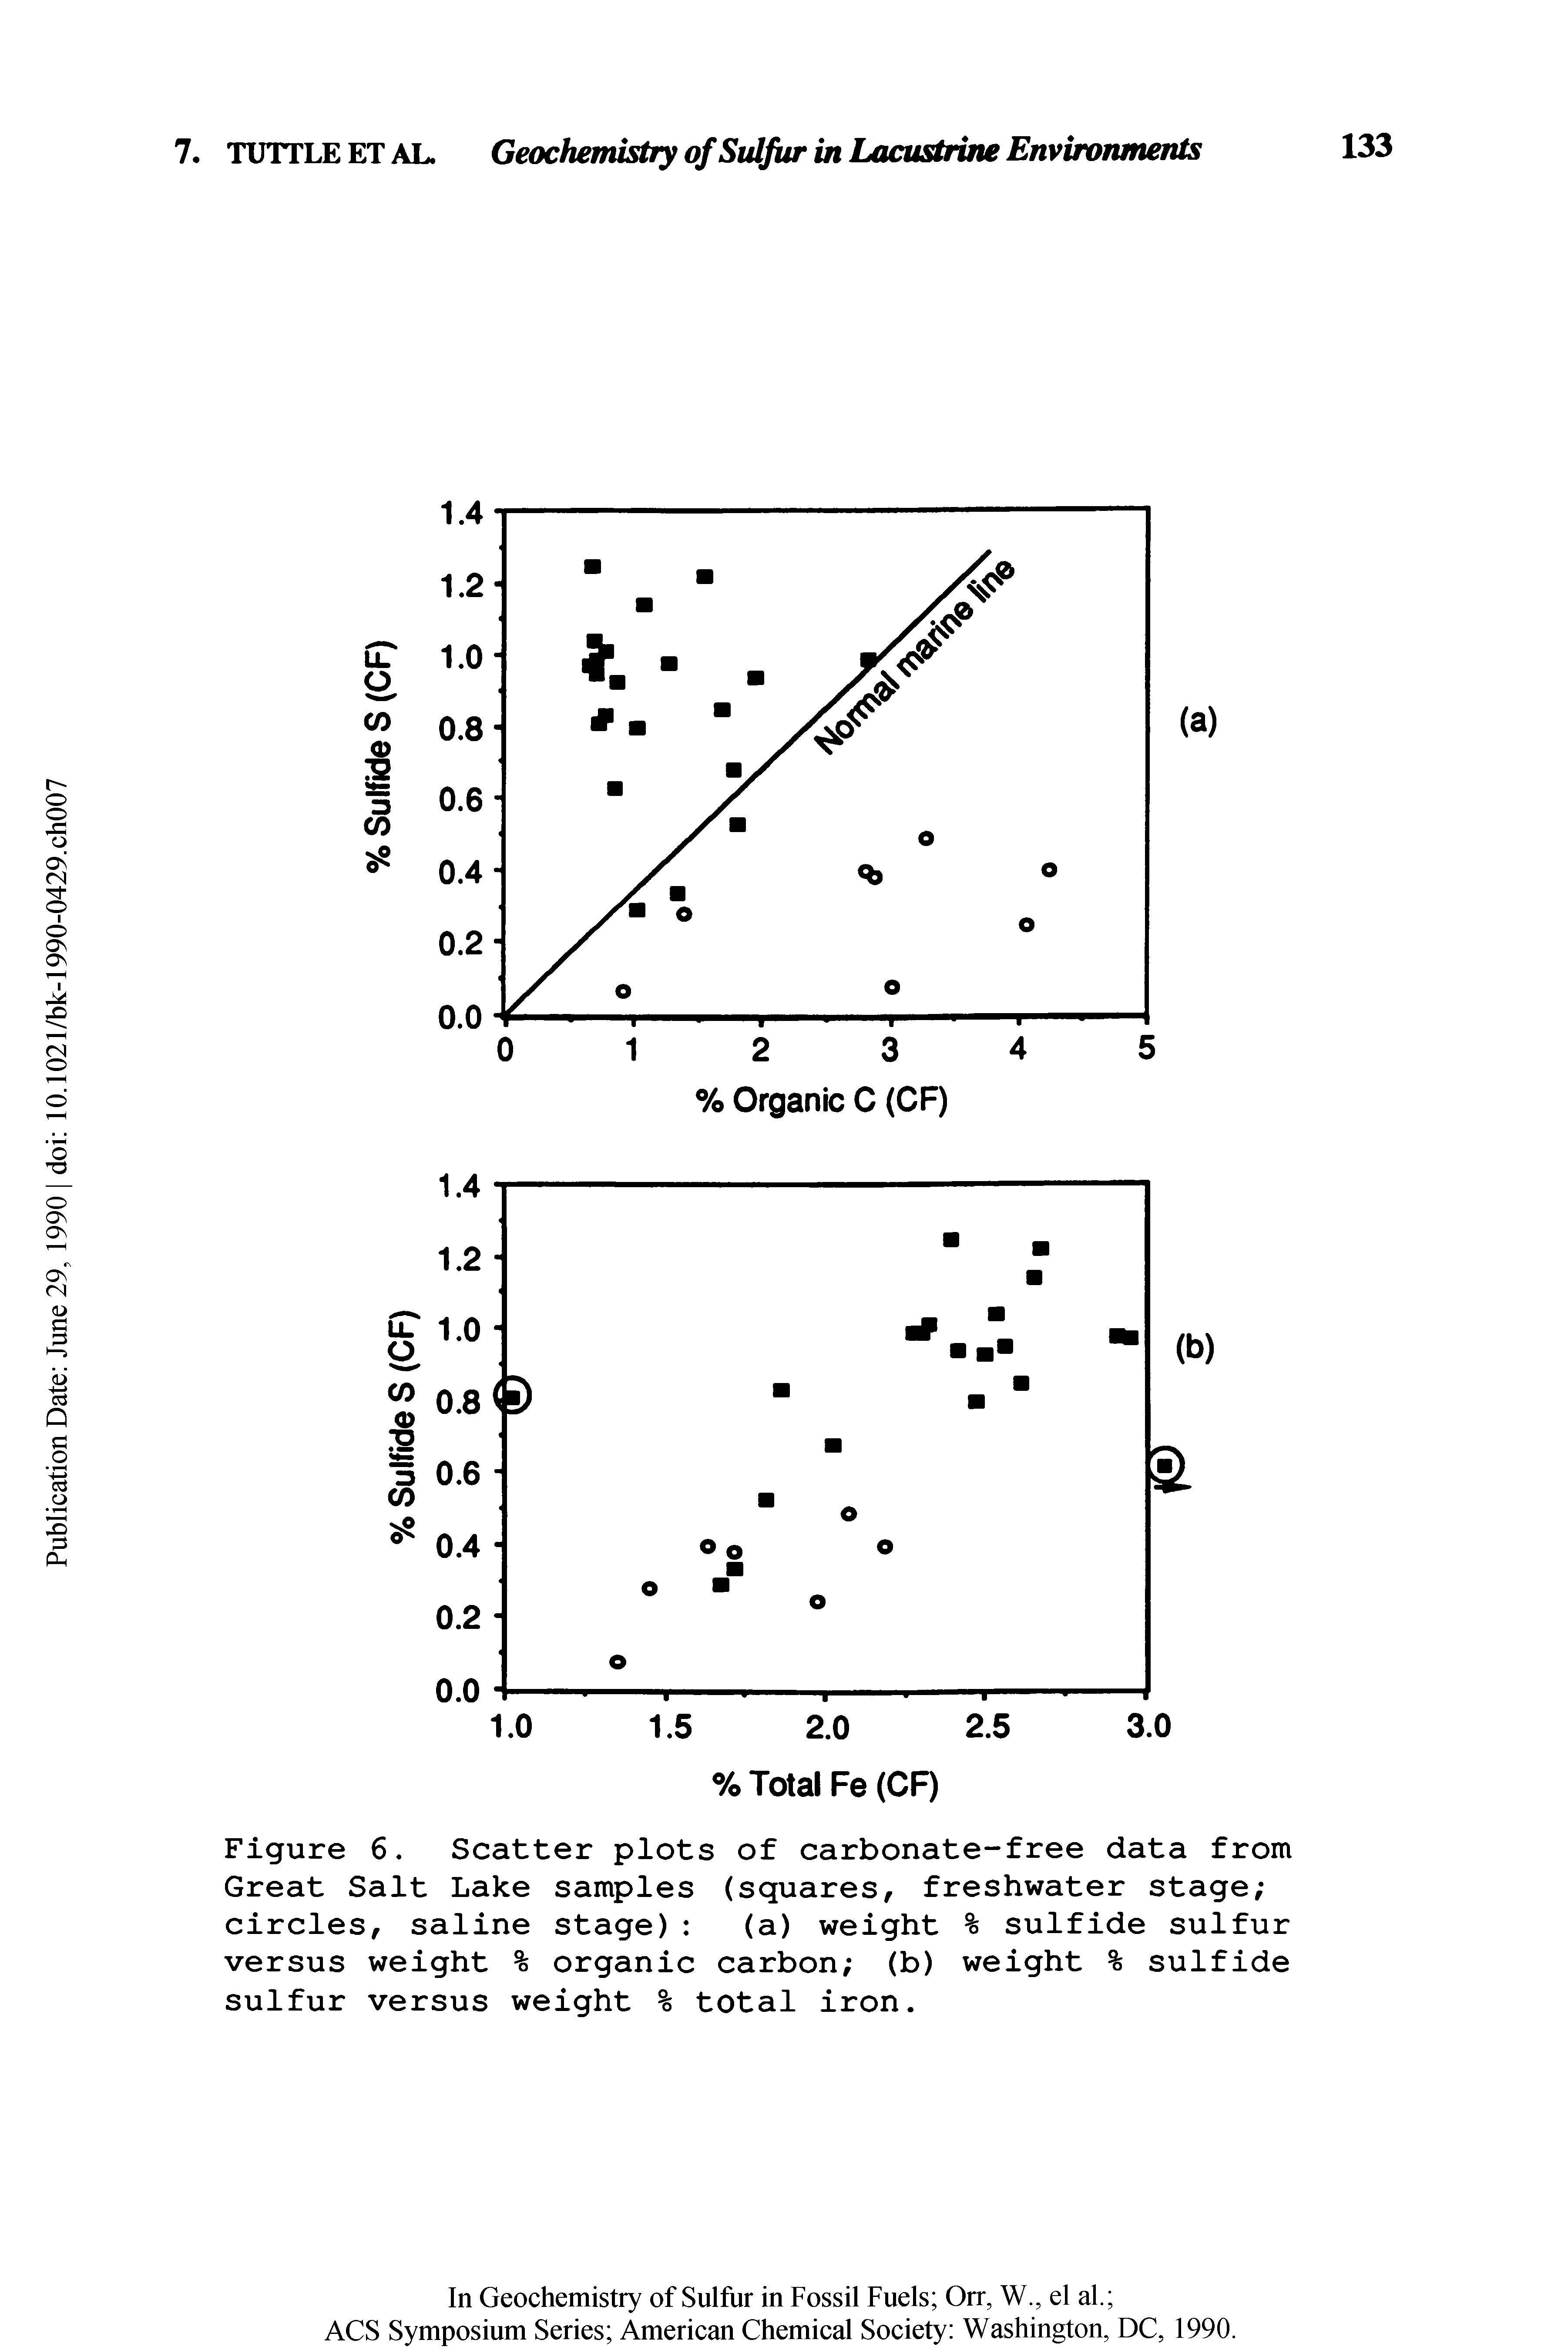 Figure 6. Scatter plots of carbonate-free data from Great Salt Lake samples (squares, freshwater stage circles, saline stage) (a) weight % sulfide sulfur...